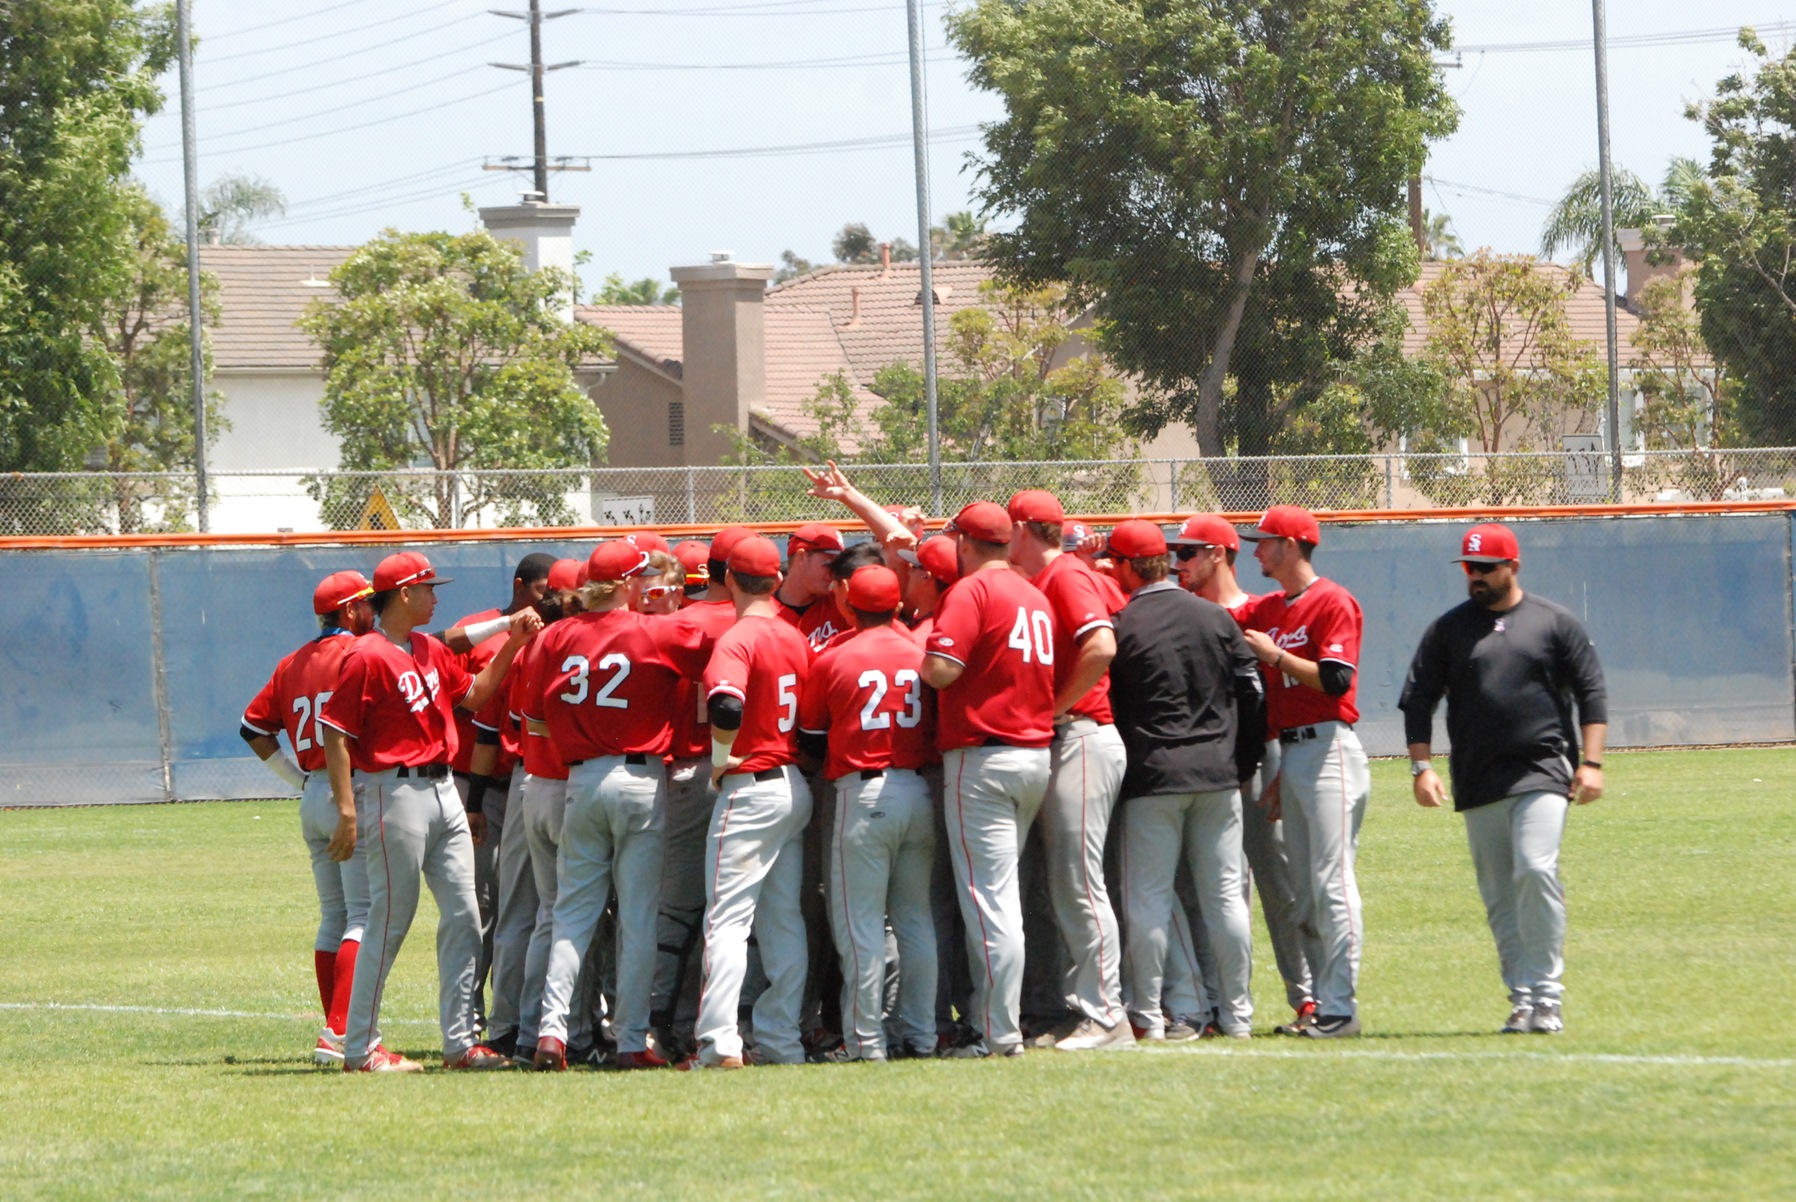 Santa Ana Throws First Punch but Drops Series to OCC in Three